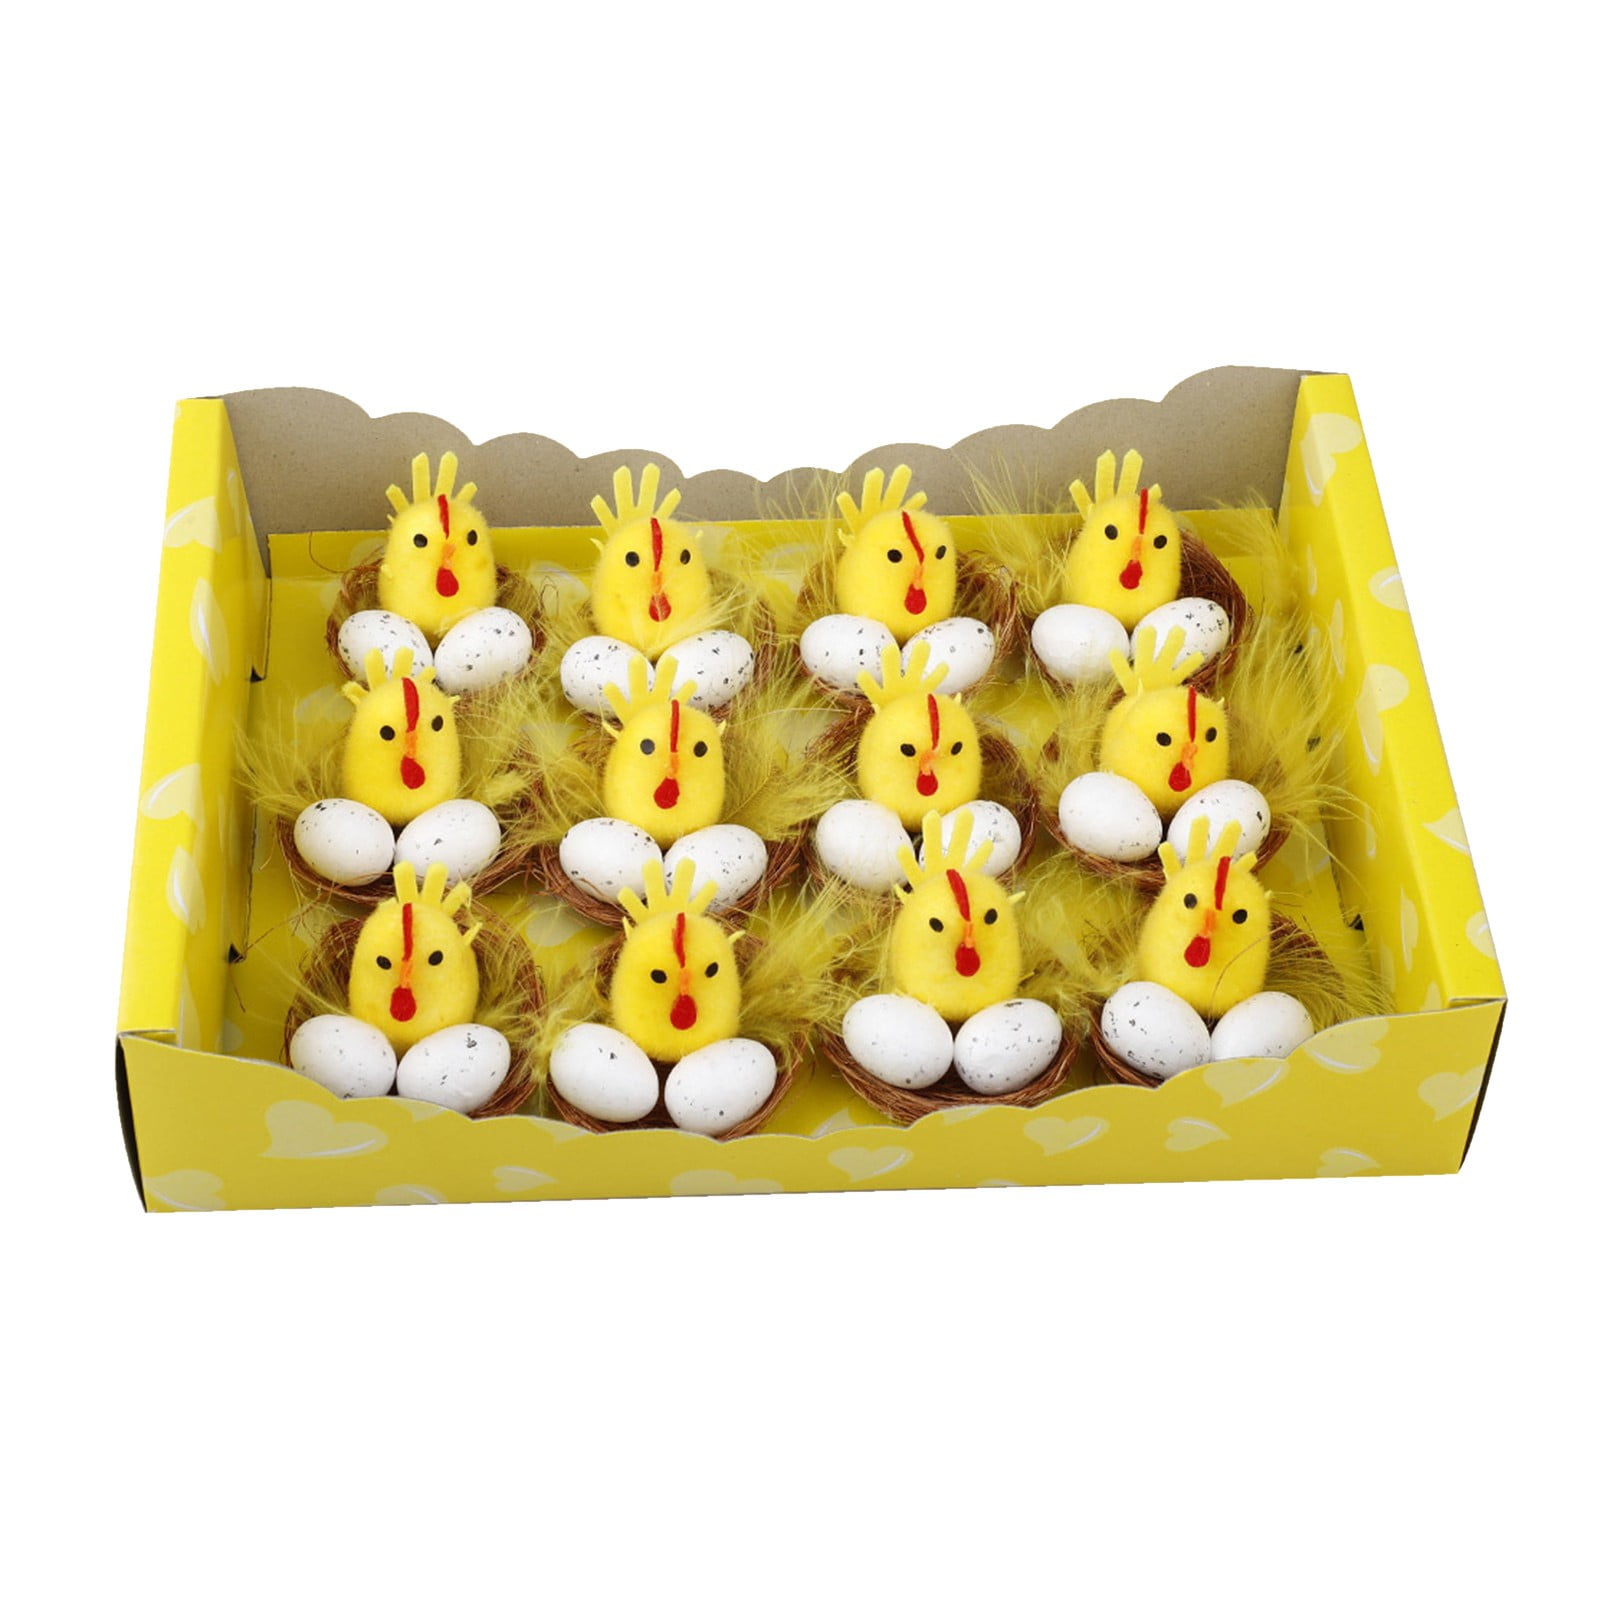 10 Easter Chicks In Box 